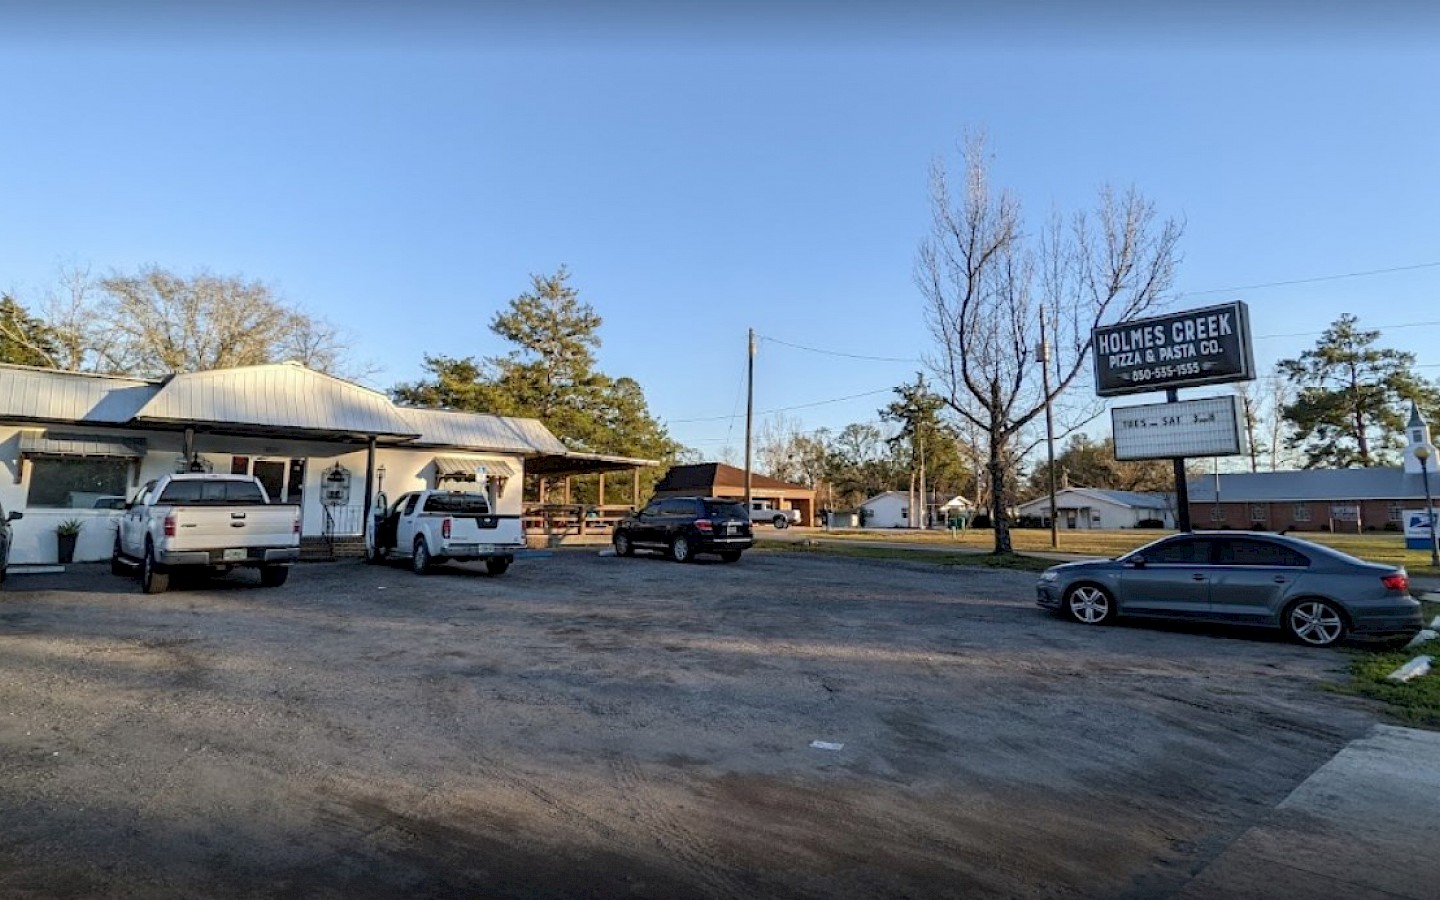 outside photo of Holmes Creek pizza and pasta, located on Main Street in Vernon, Florida